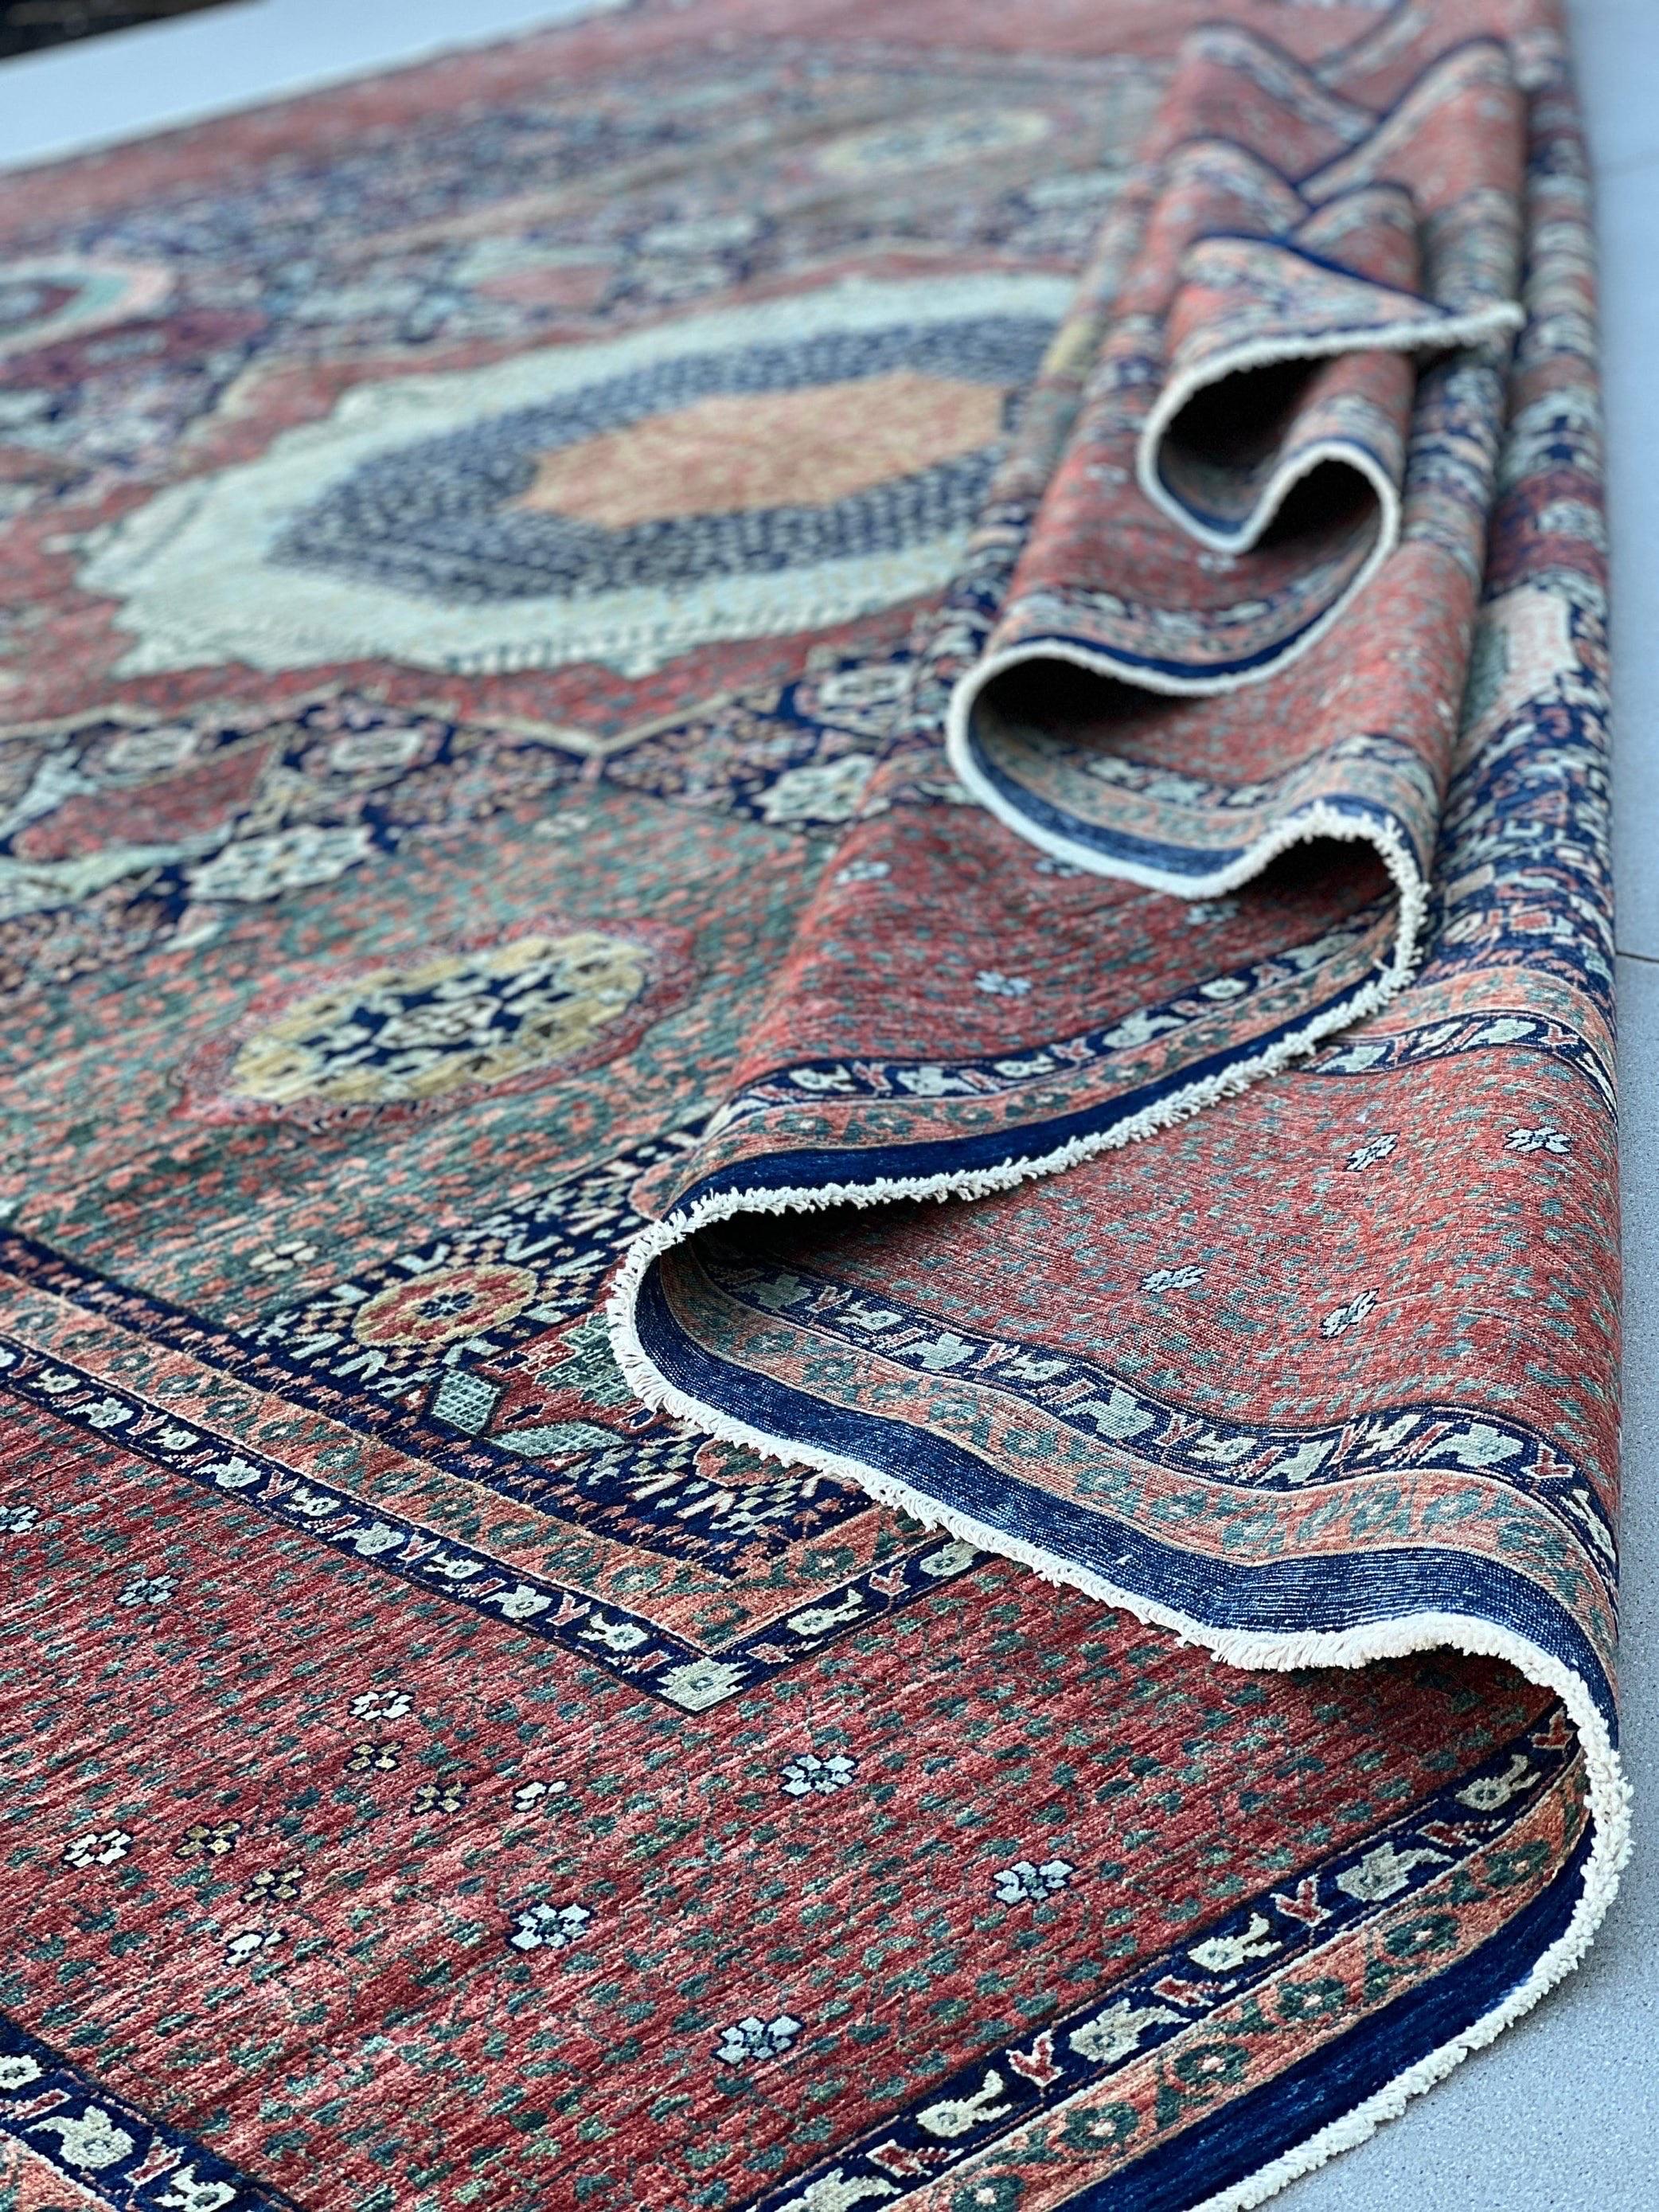 Hand-Knotted Afghan Mamluk Area Rug Salmon Pink Red Navy Blue Teal Sage In New Condition For Sale In San Marcos, CA